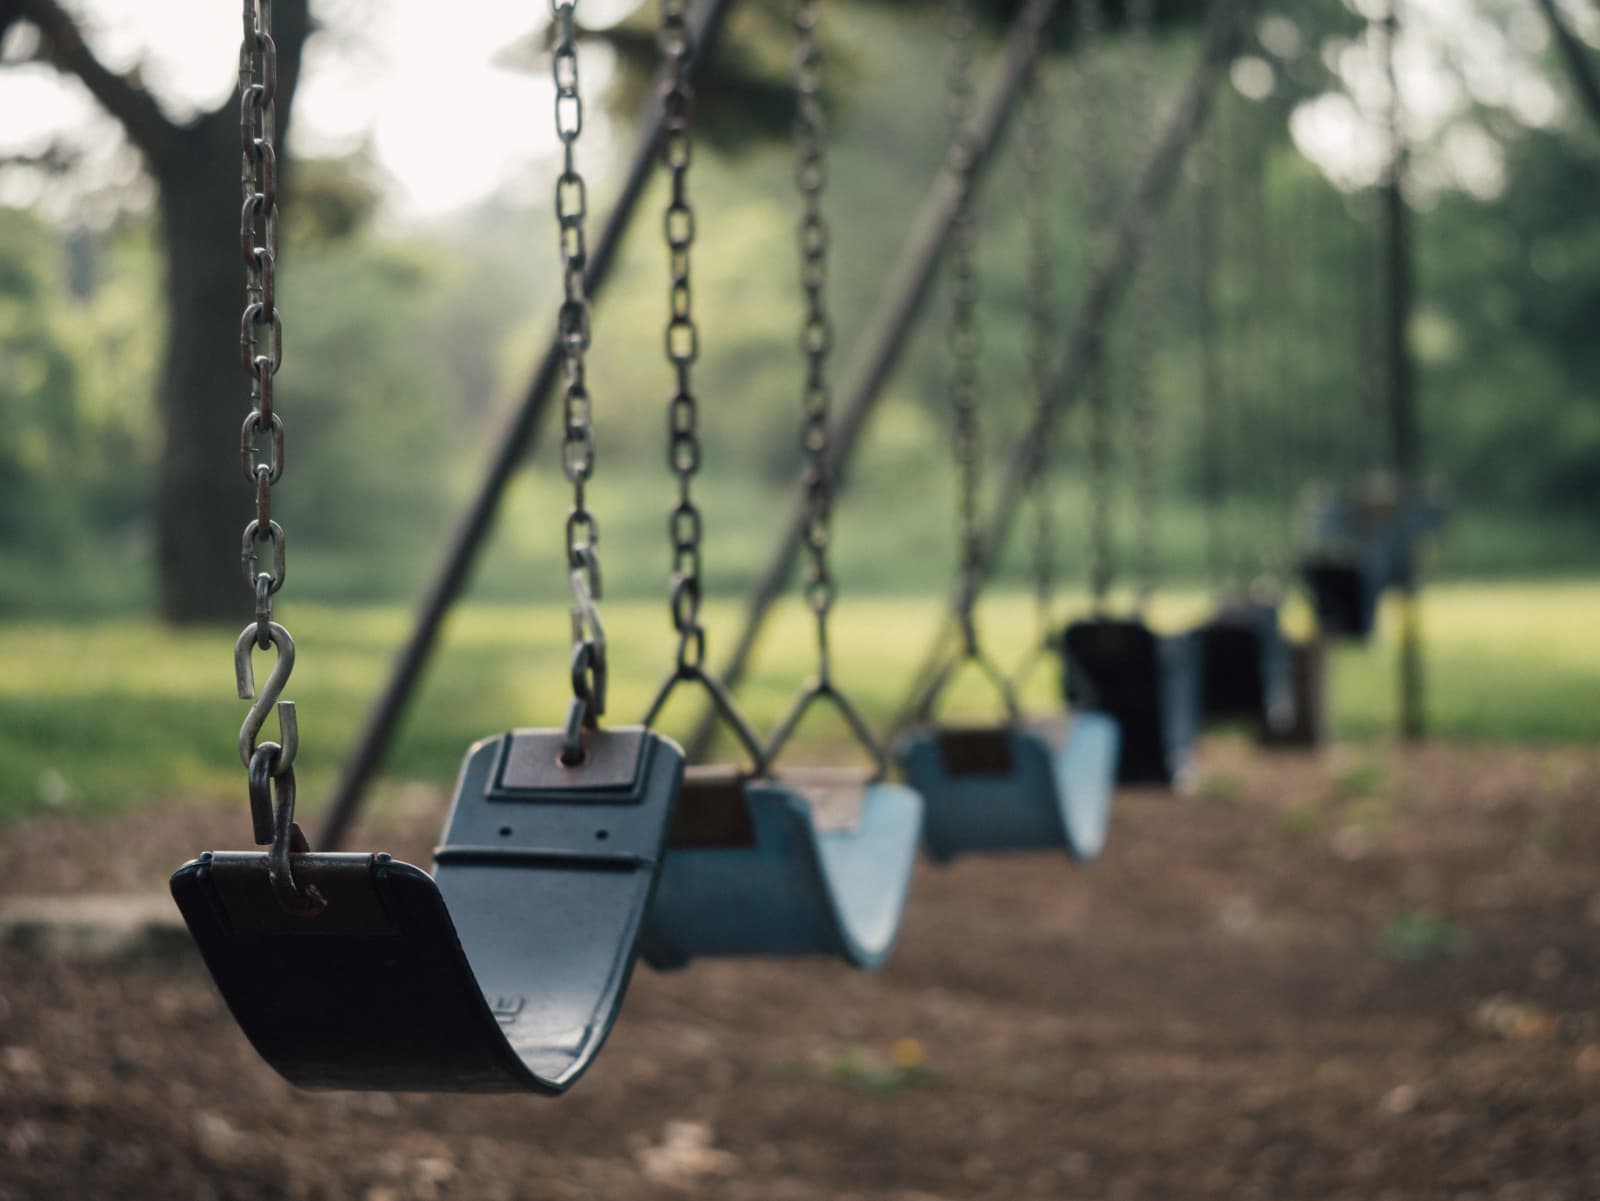 How To Get Your Local Park’s Playground Equipment Updated Or Rebuilt